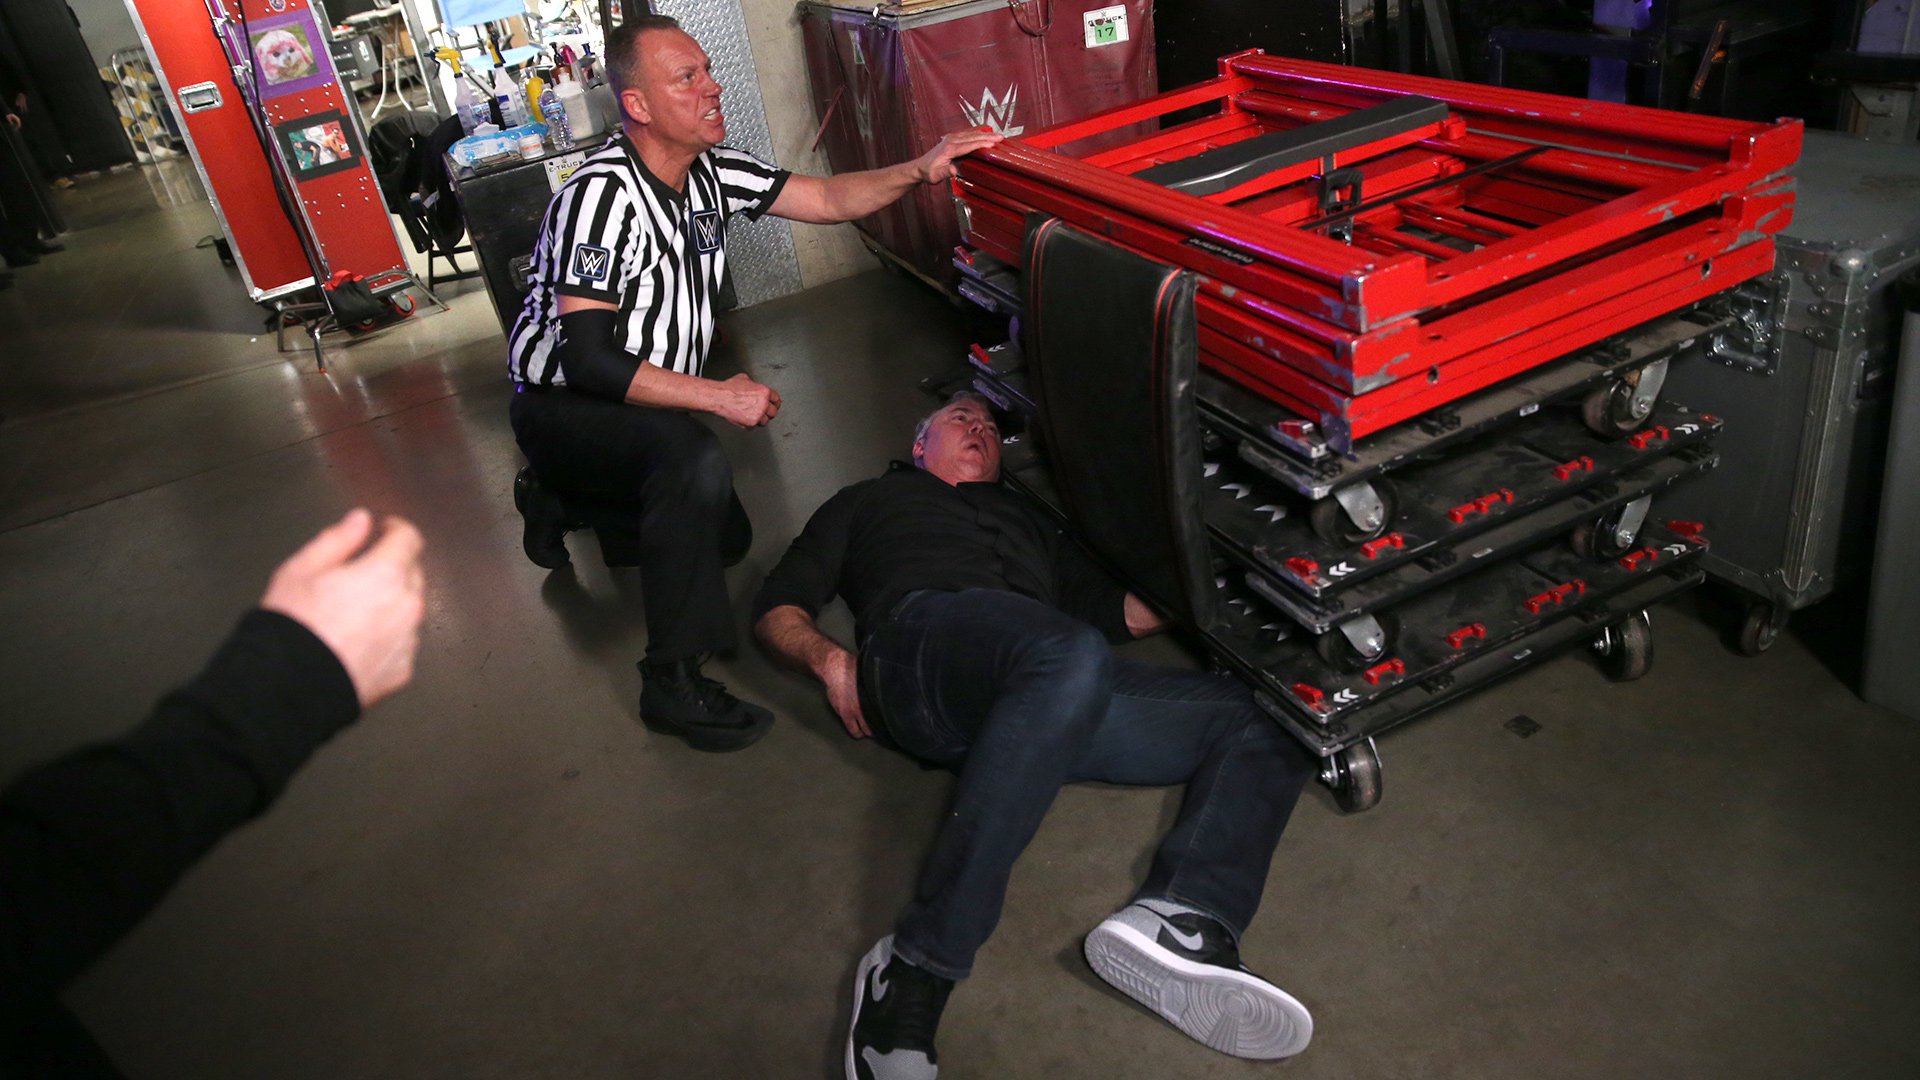 Shane McMahon suffers several injuries while being attacked by Kevin Owens & Sami Zayn on SmackDown LIVE